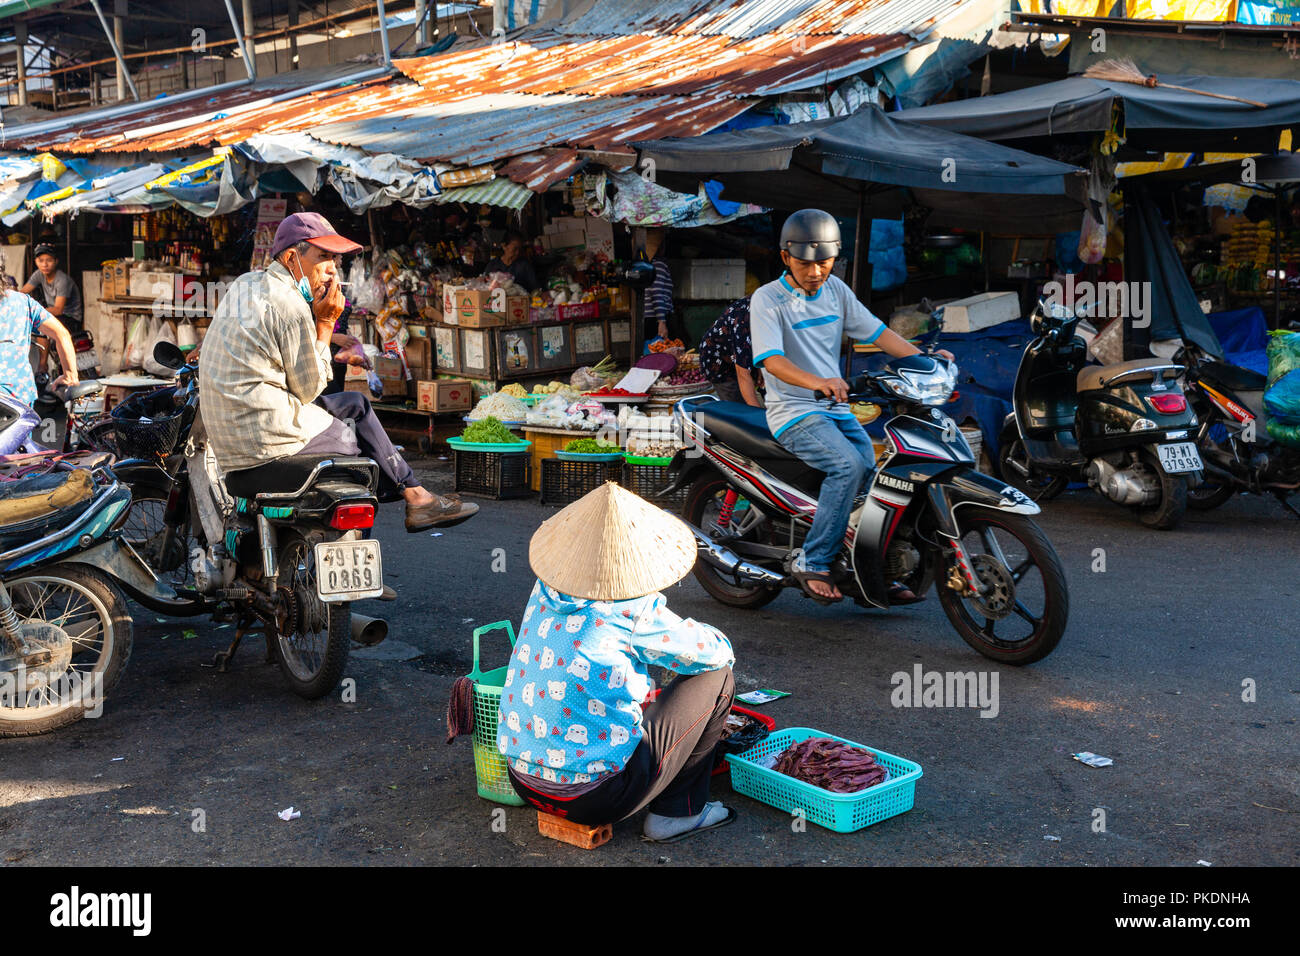 NHA TRANG, VIETNAM - AUGUST 06: A woman sells dried fish at the street market on August 06, 2018 in Nha Trang, Vietnam. Stock Photo